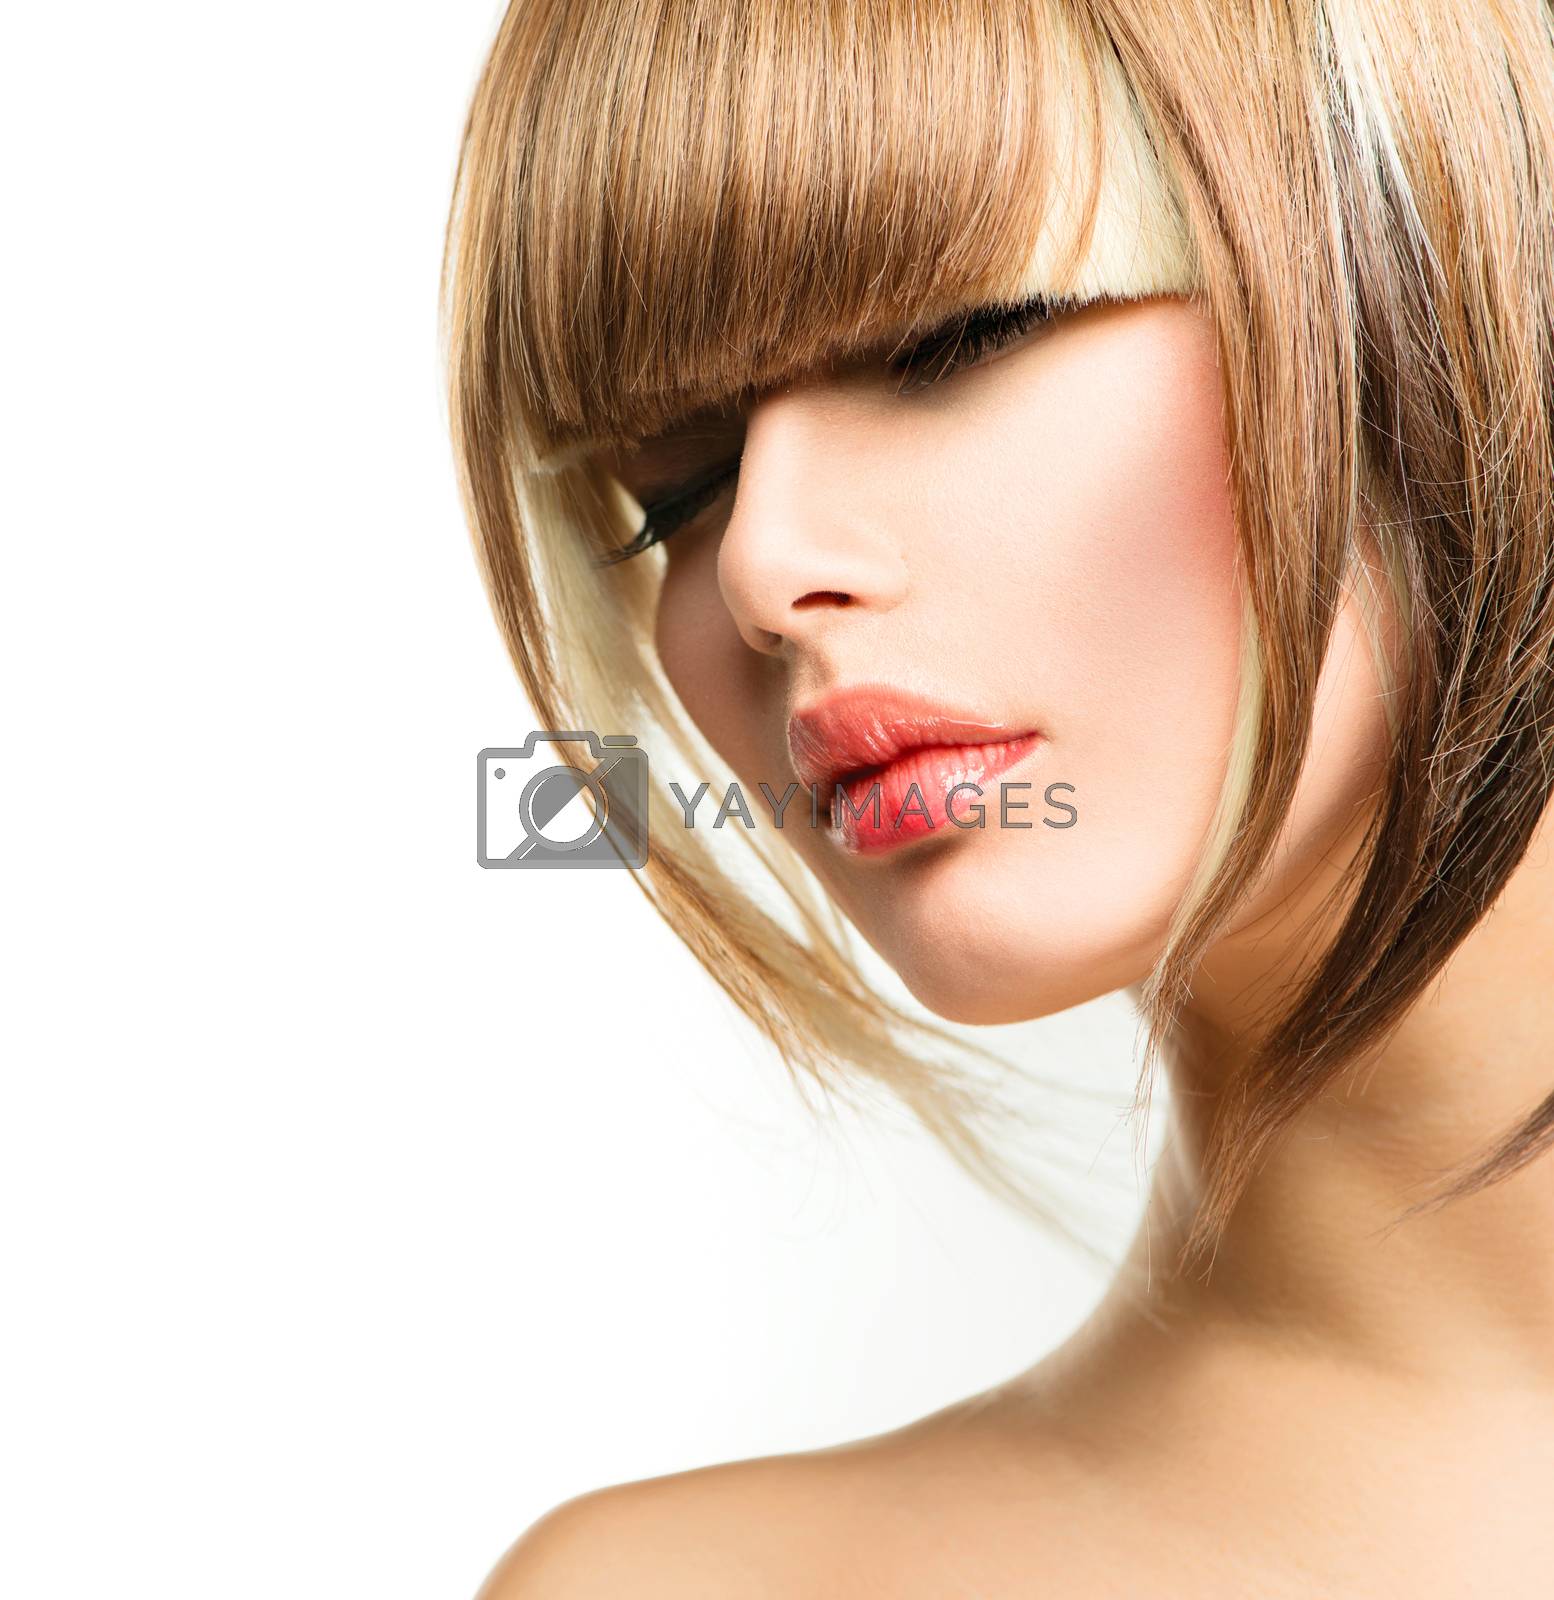 Royalty free image of Beautiful Fashion Woman Hairstyle for Short Hair. Fringe Haircut by SubbotinaA